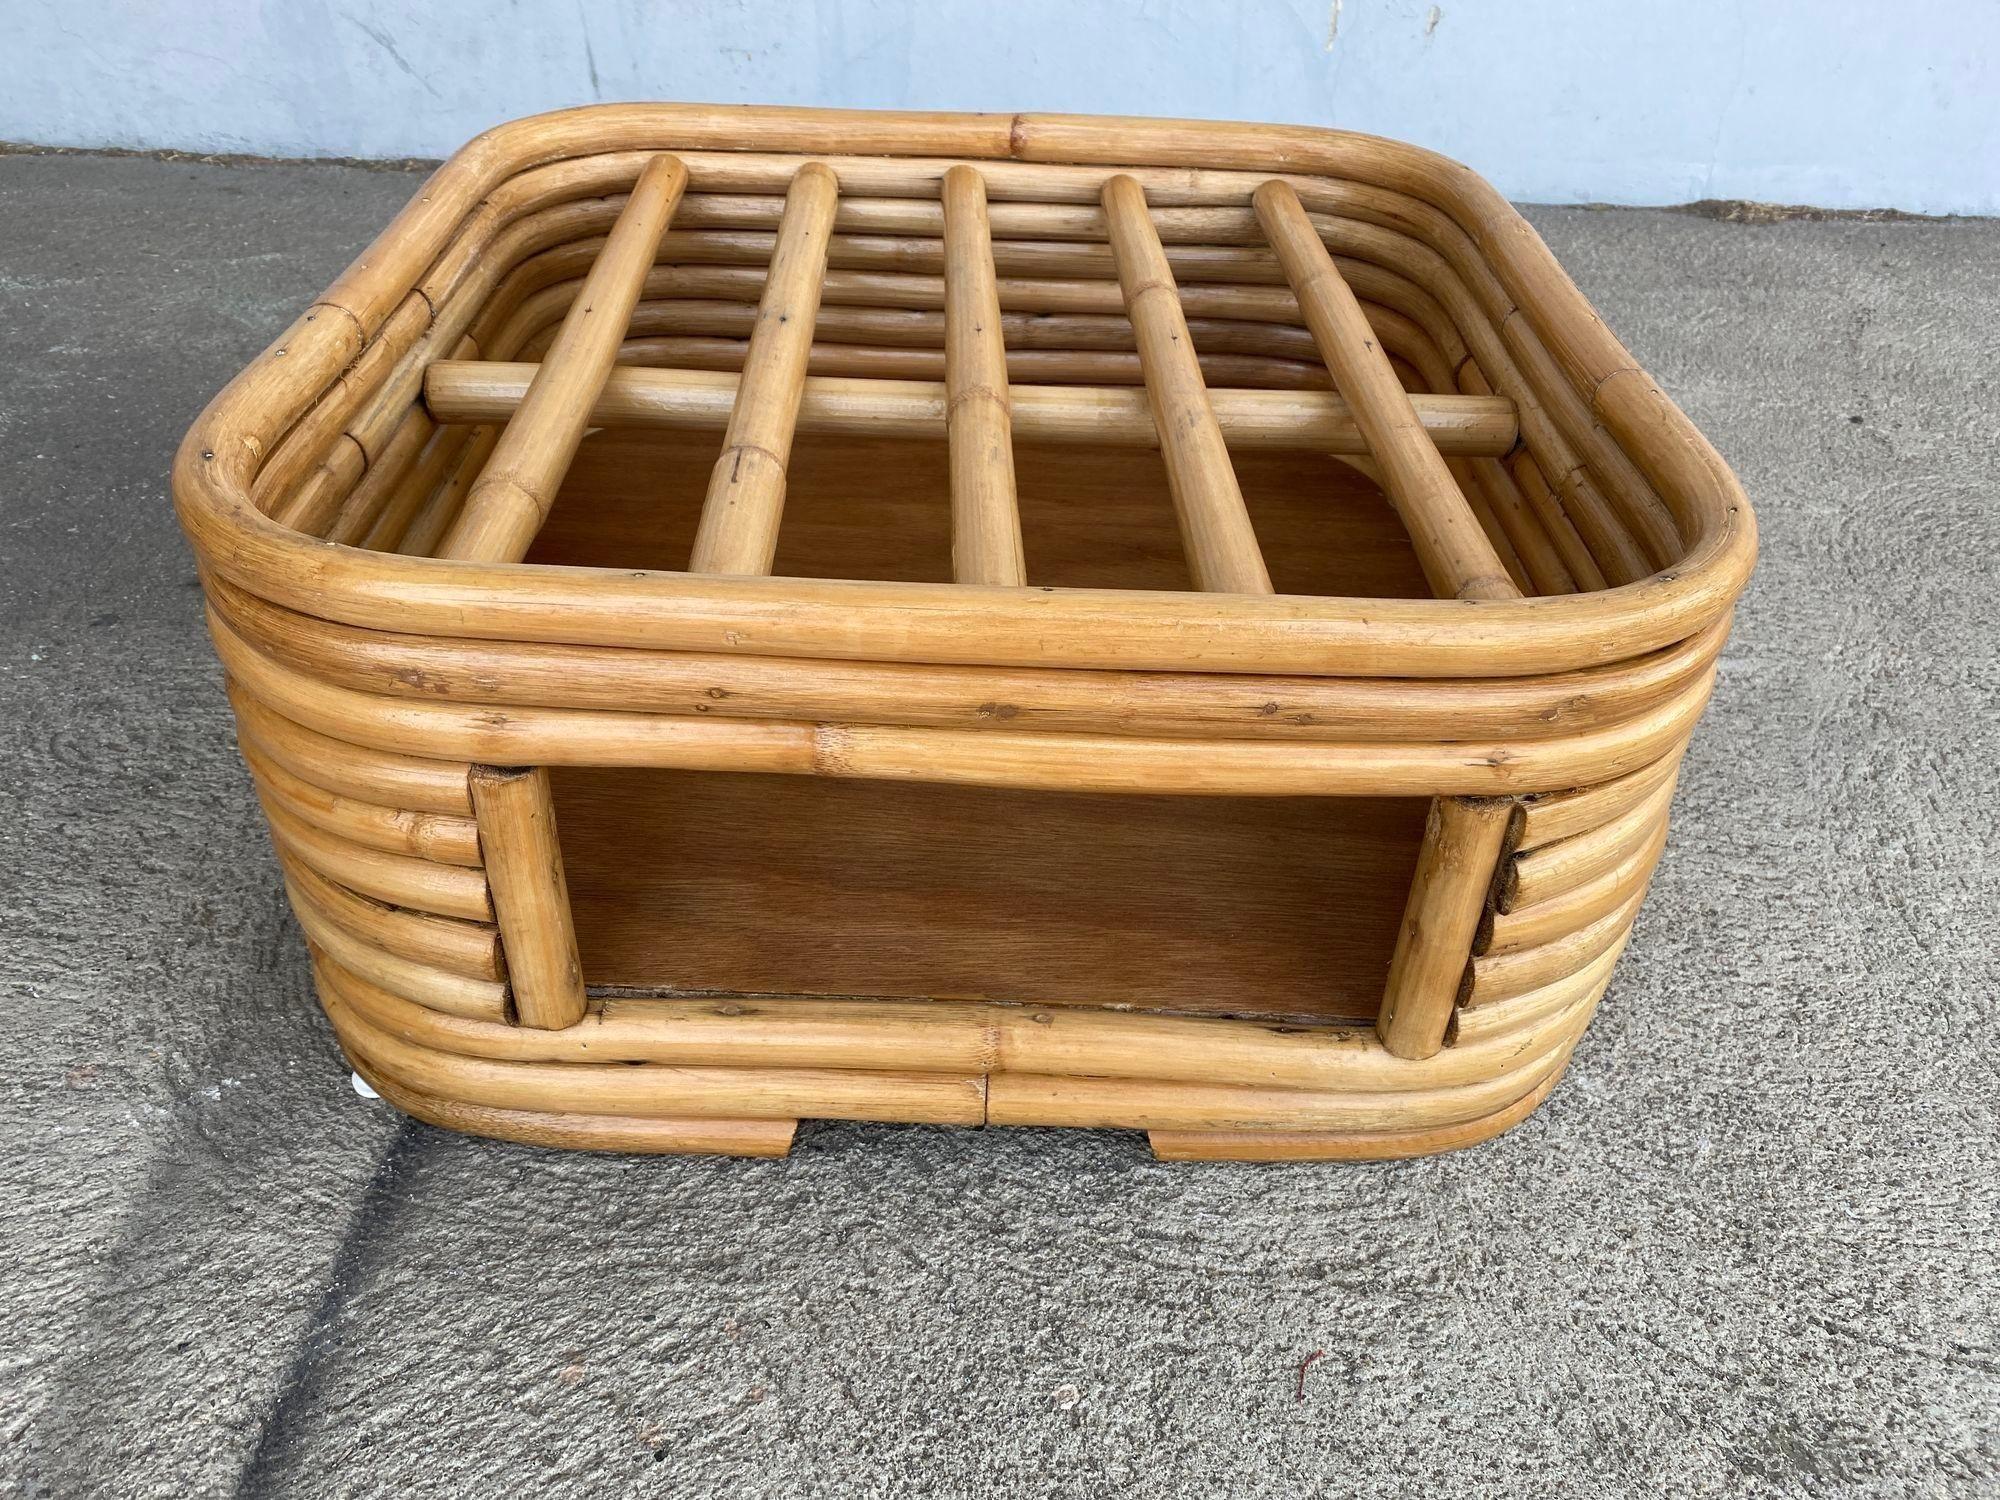 Restored Stacked Rattan Footrest Ottoman with Cubby Space, Pair In Excellent Condition For Sale In Van Nuys, CA